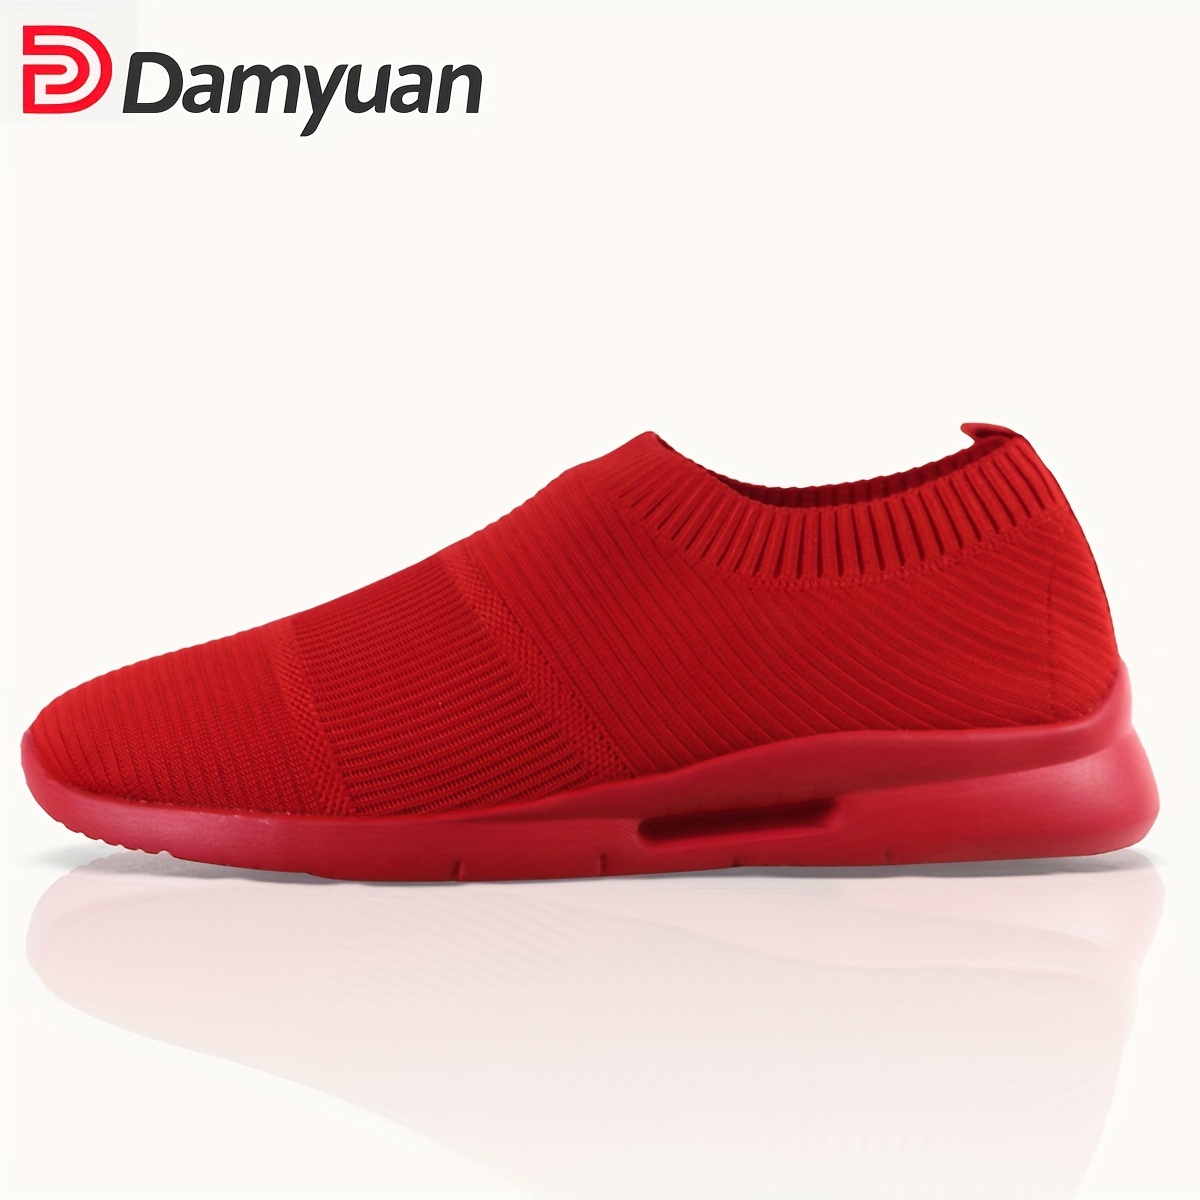 

Men's Knit Plain Color Anti-skid Slip On Running Sneakers Anti-odor Comfortable Breathable Casual Sock Shoes